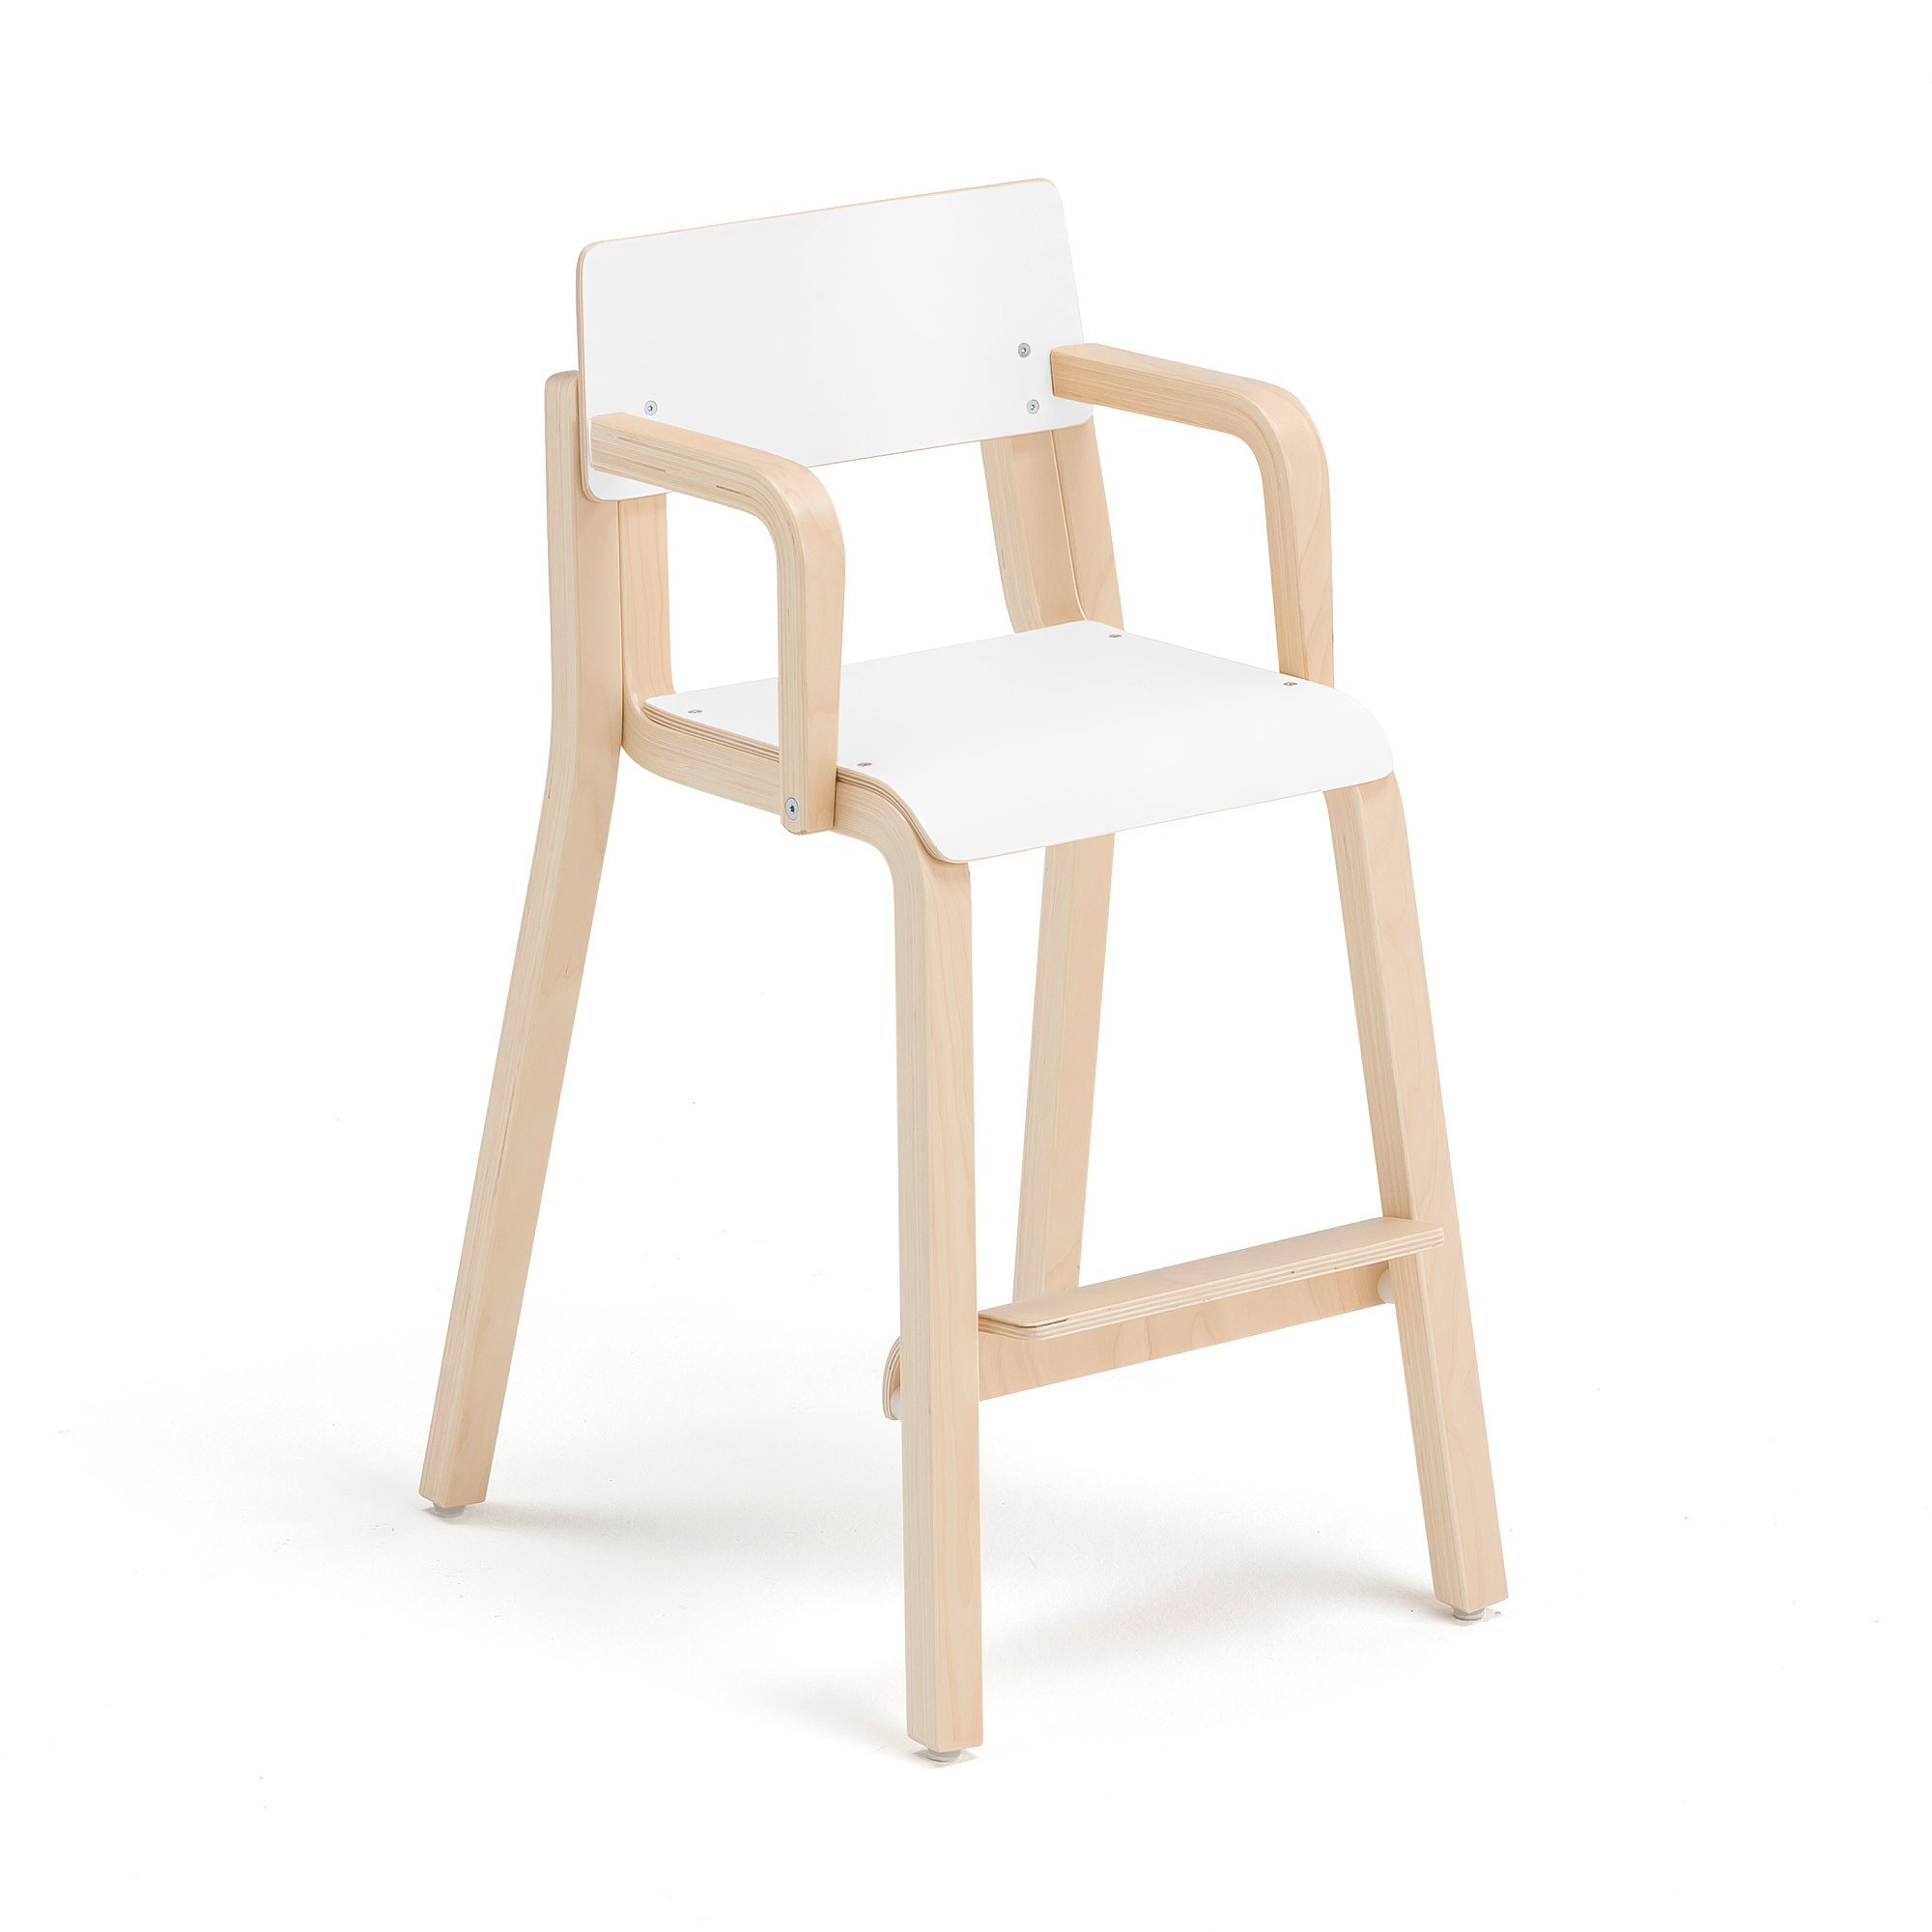 Tall children's chair DANTE with armrests, H 500 mm, birch, white laminate